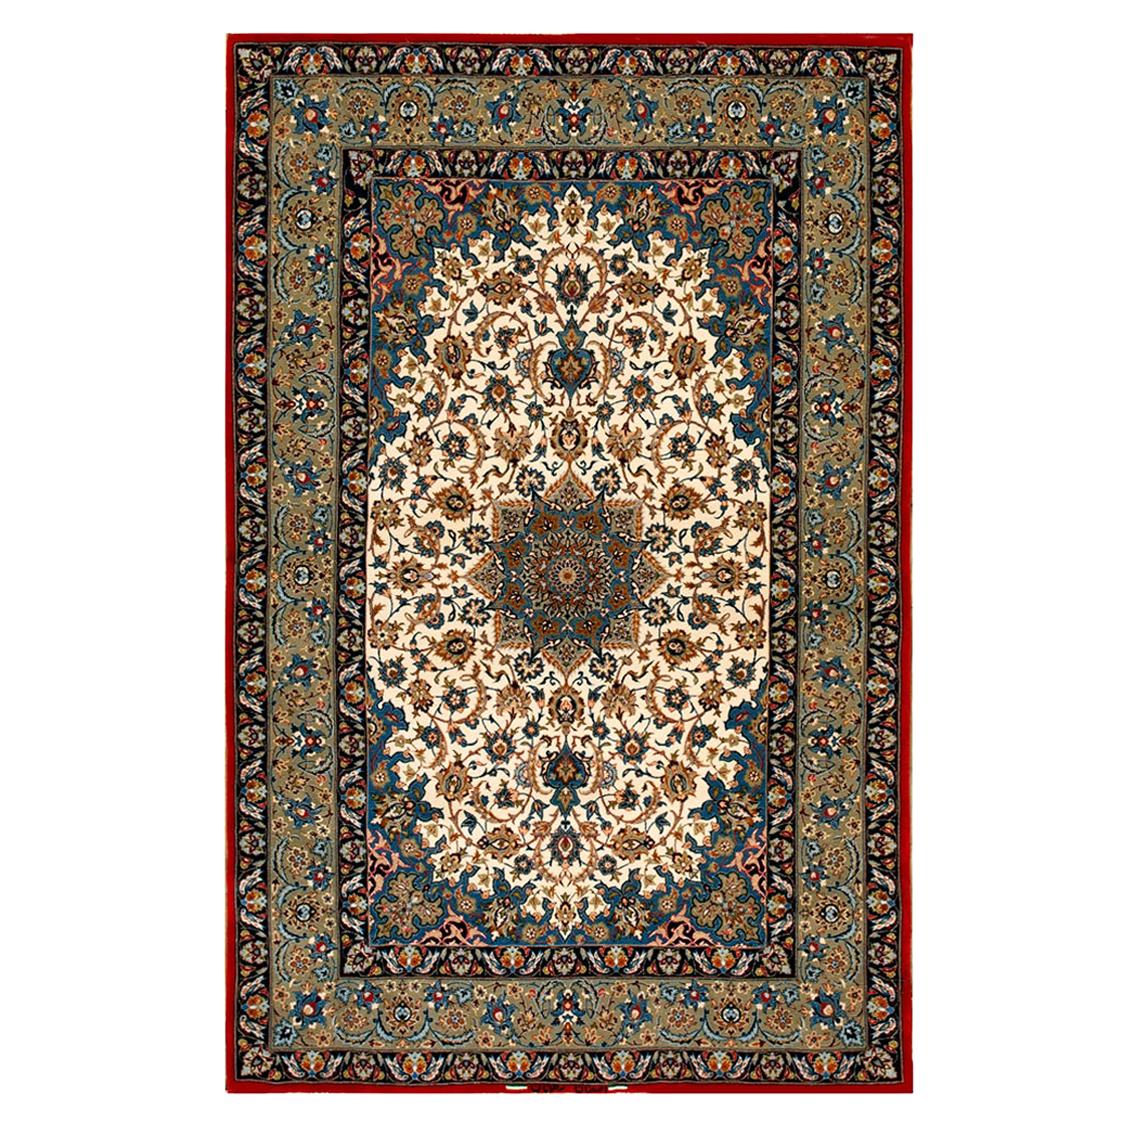 Mid 20th Century Isfahan Carpet ( 3'7" x 5'6" - 109 x 167 ) For Sale